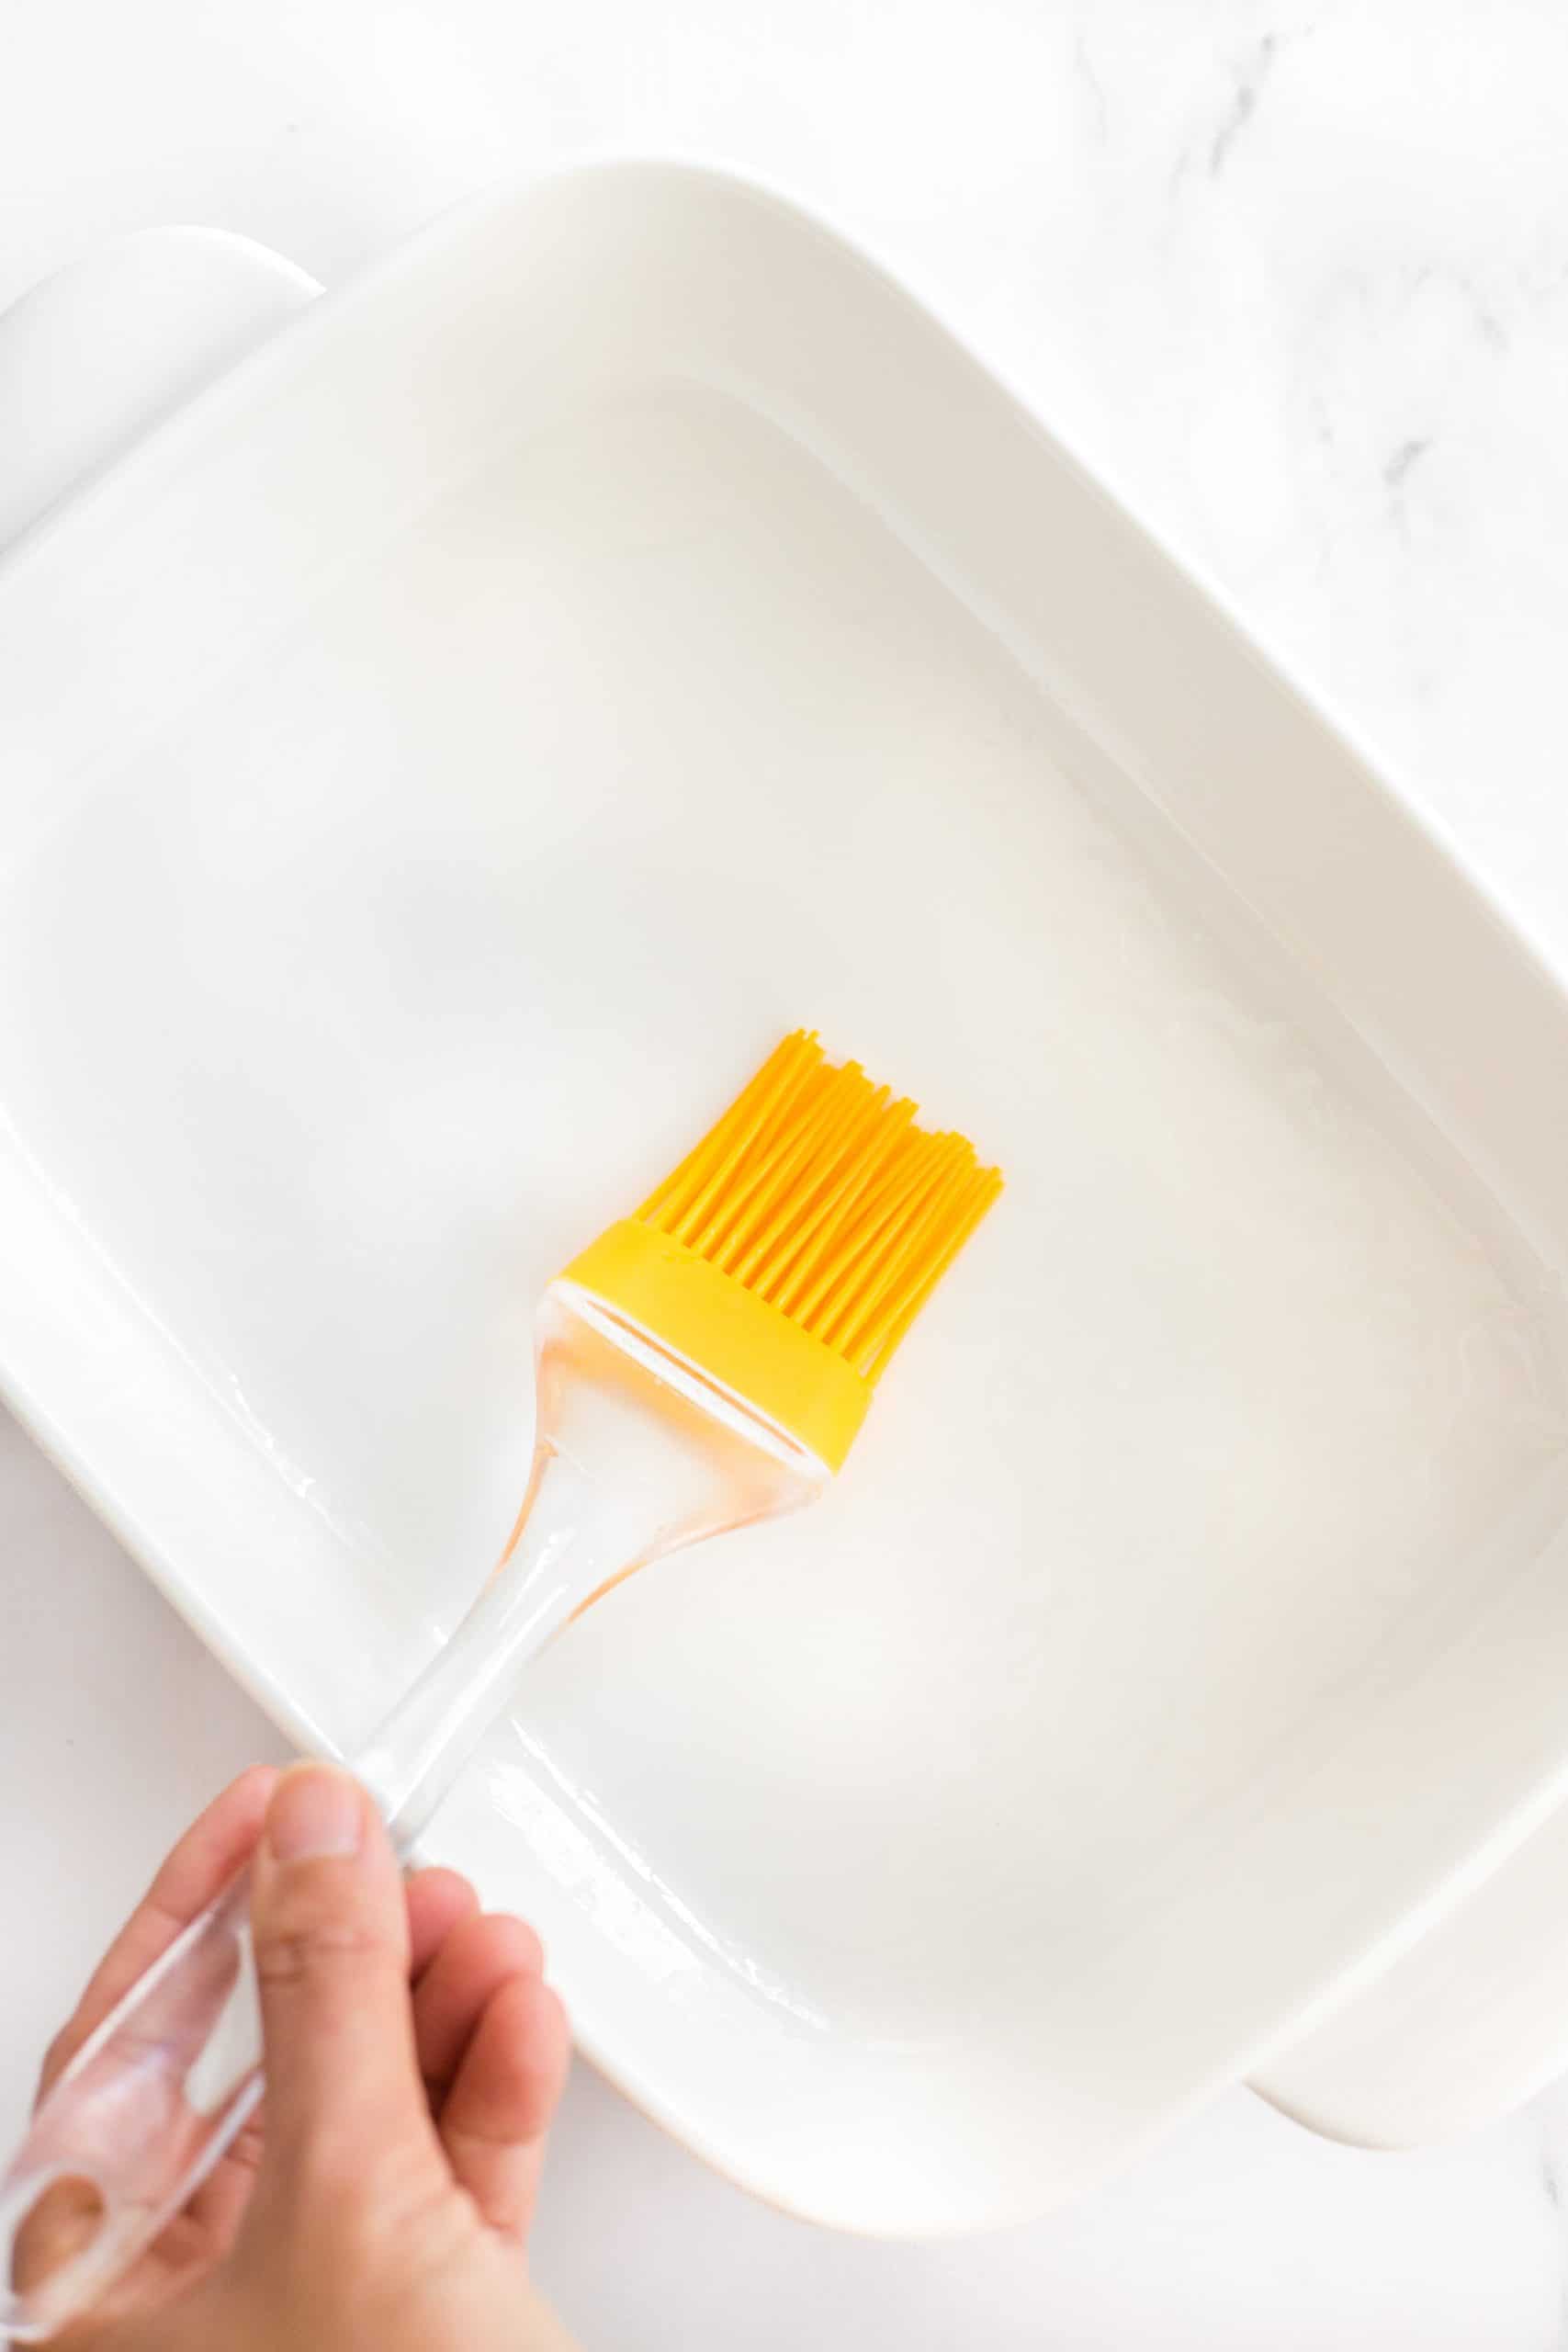 Brushing a white baking dish with oil.